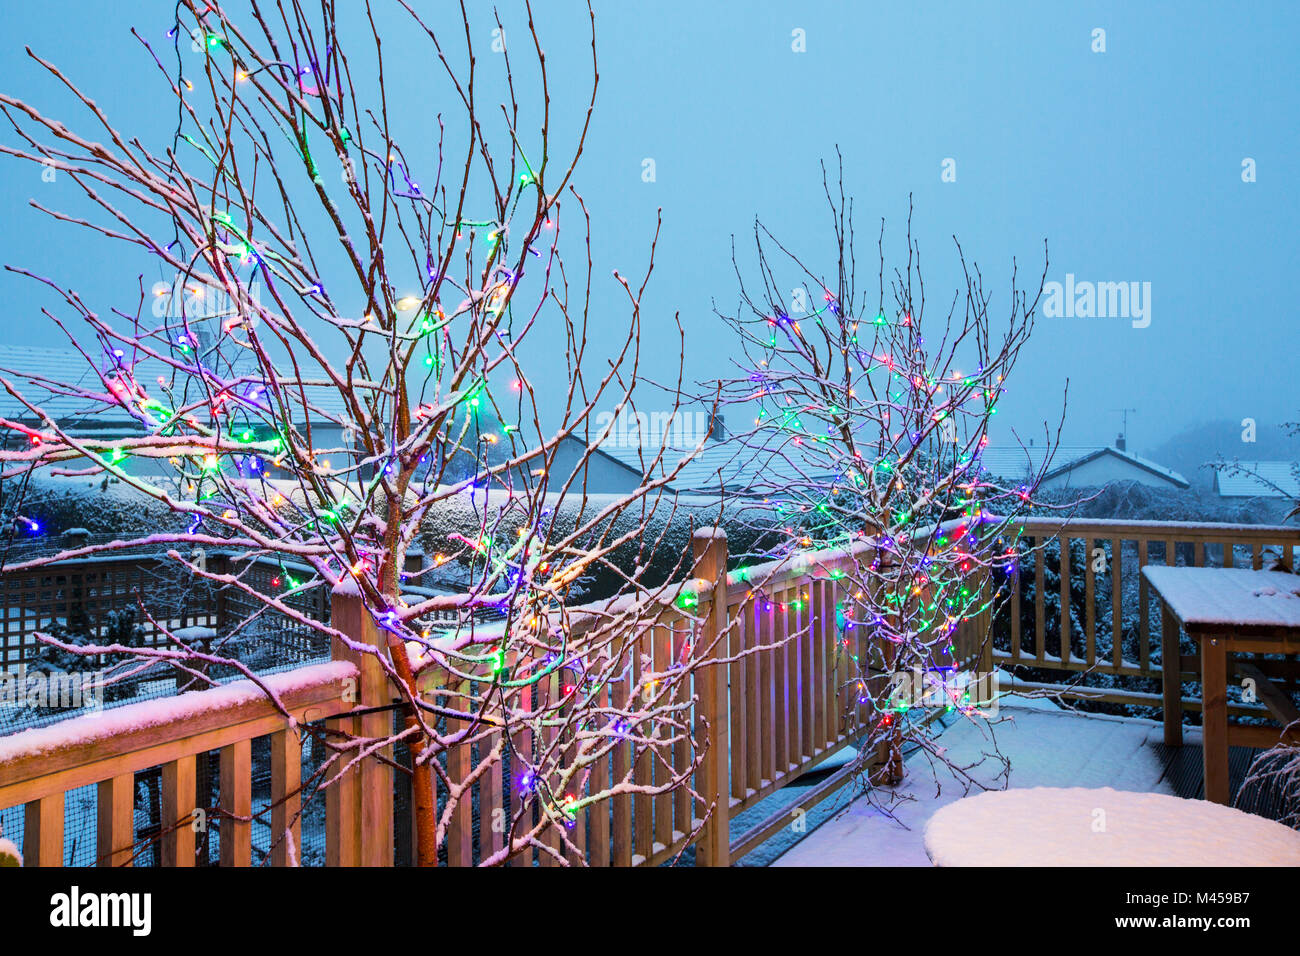 Christmas lights on a balcony of a house in Ambleside in snow. Stock Photo